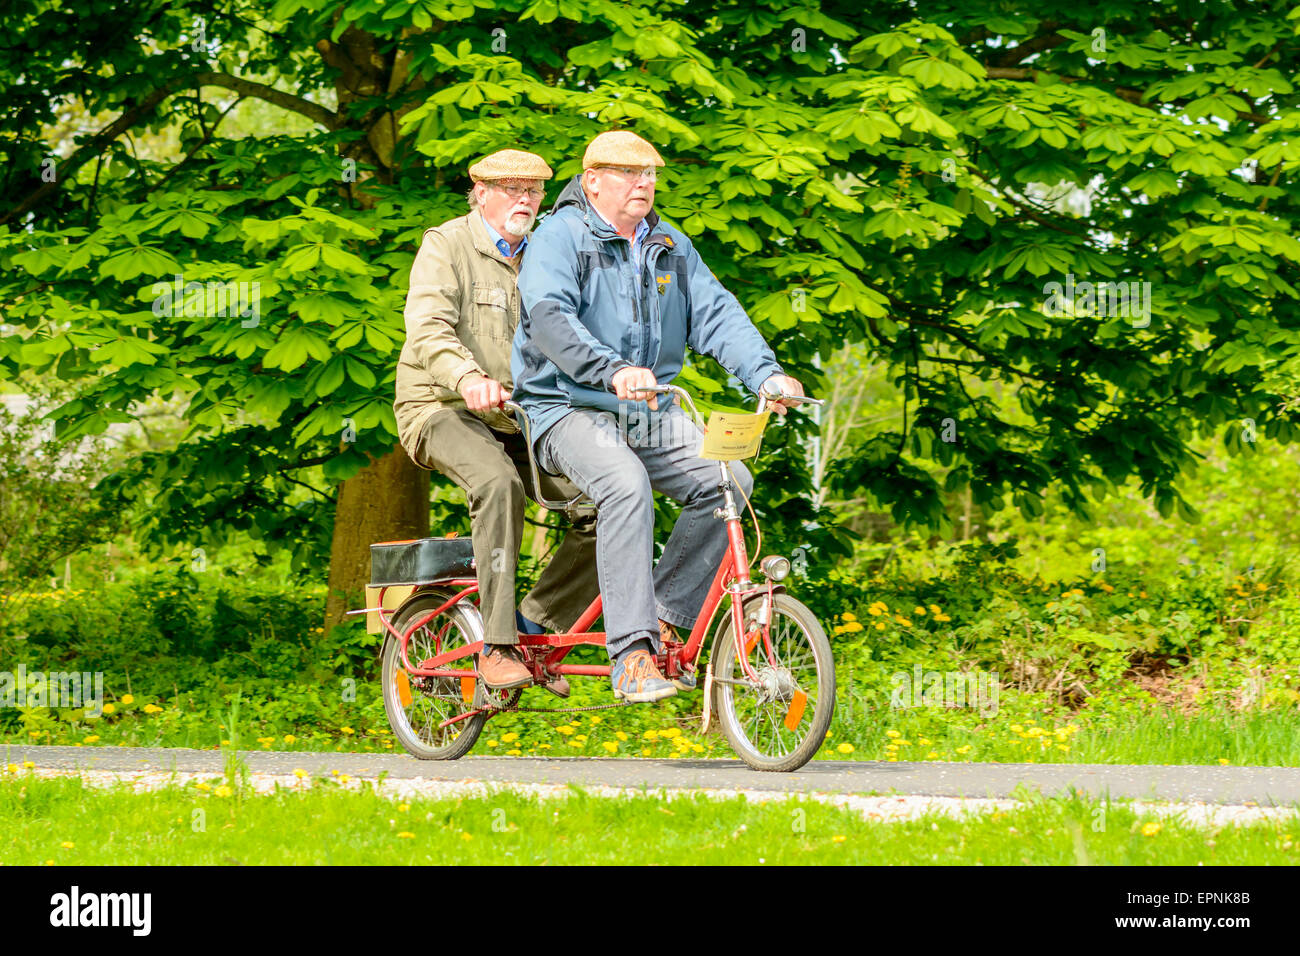 Solvesborg, Sweden - May 16, 2015: International Veteran Cycle Association (IVCA) 35th rally. Costume ride through public streets in town. Ride through park. Stock Photo